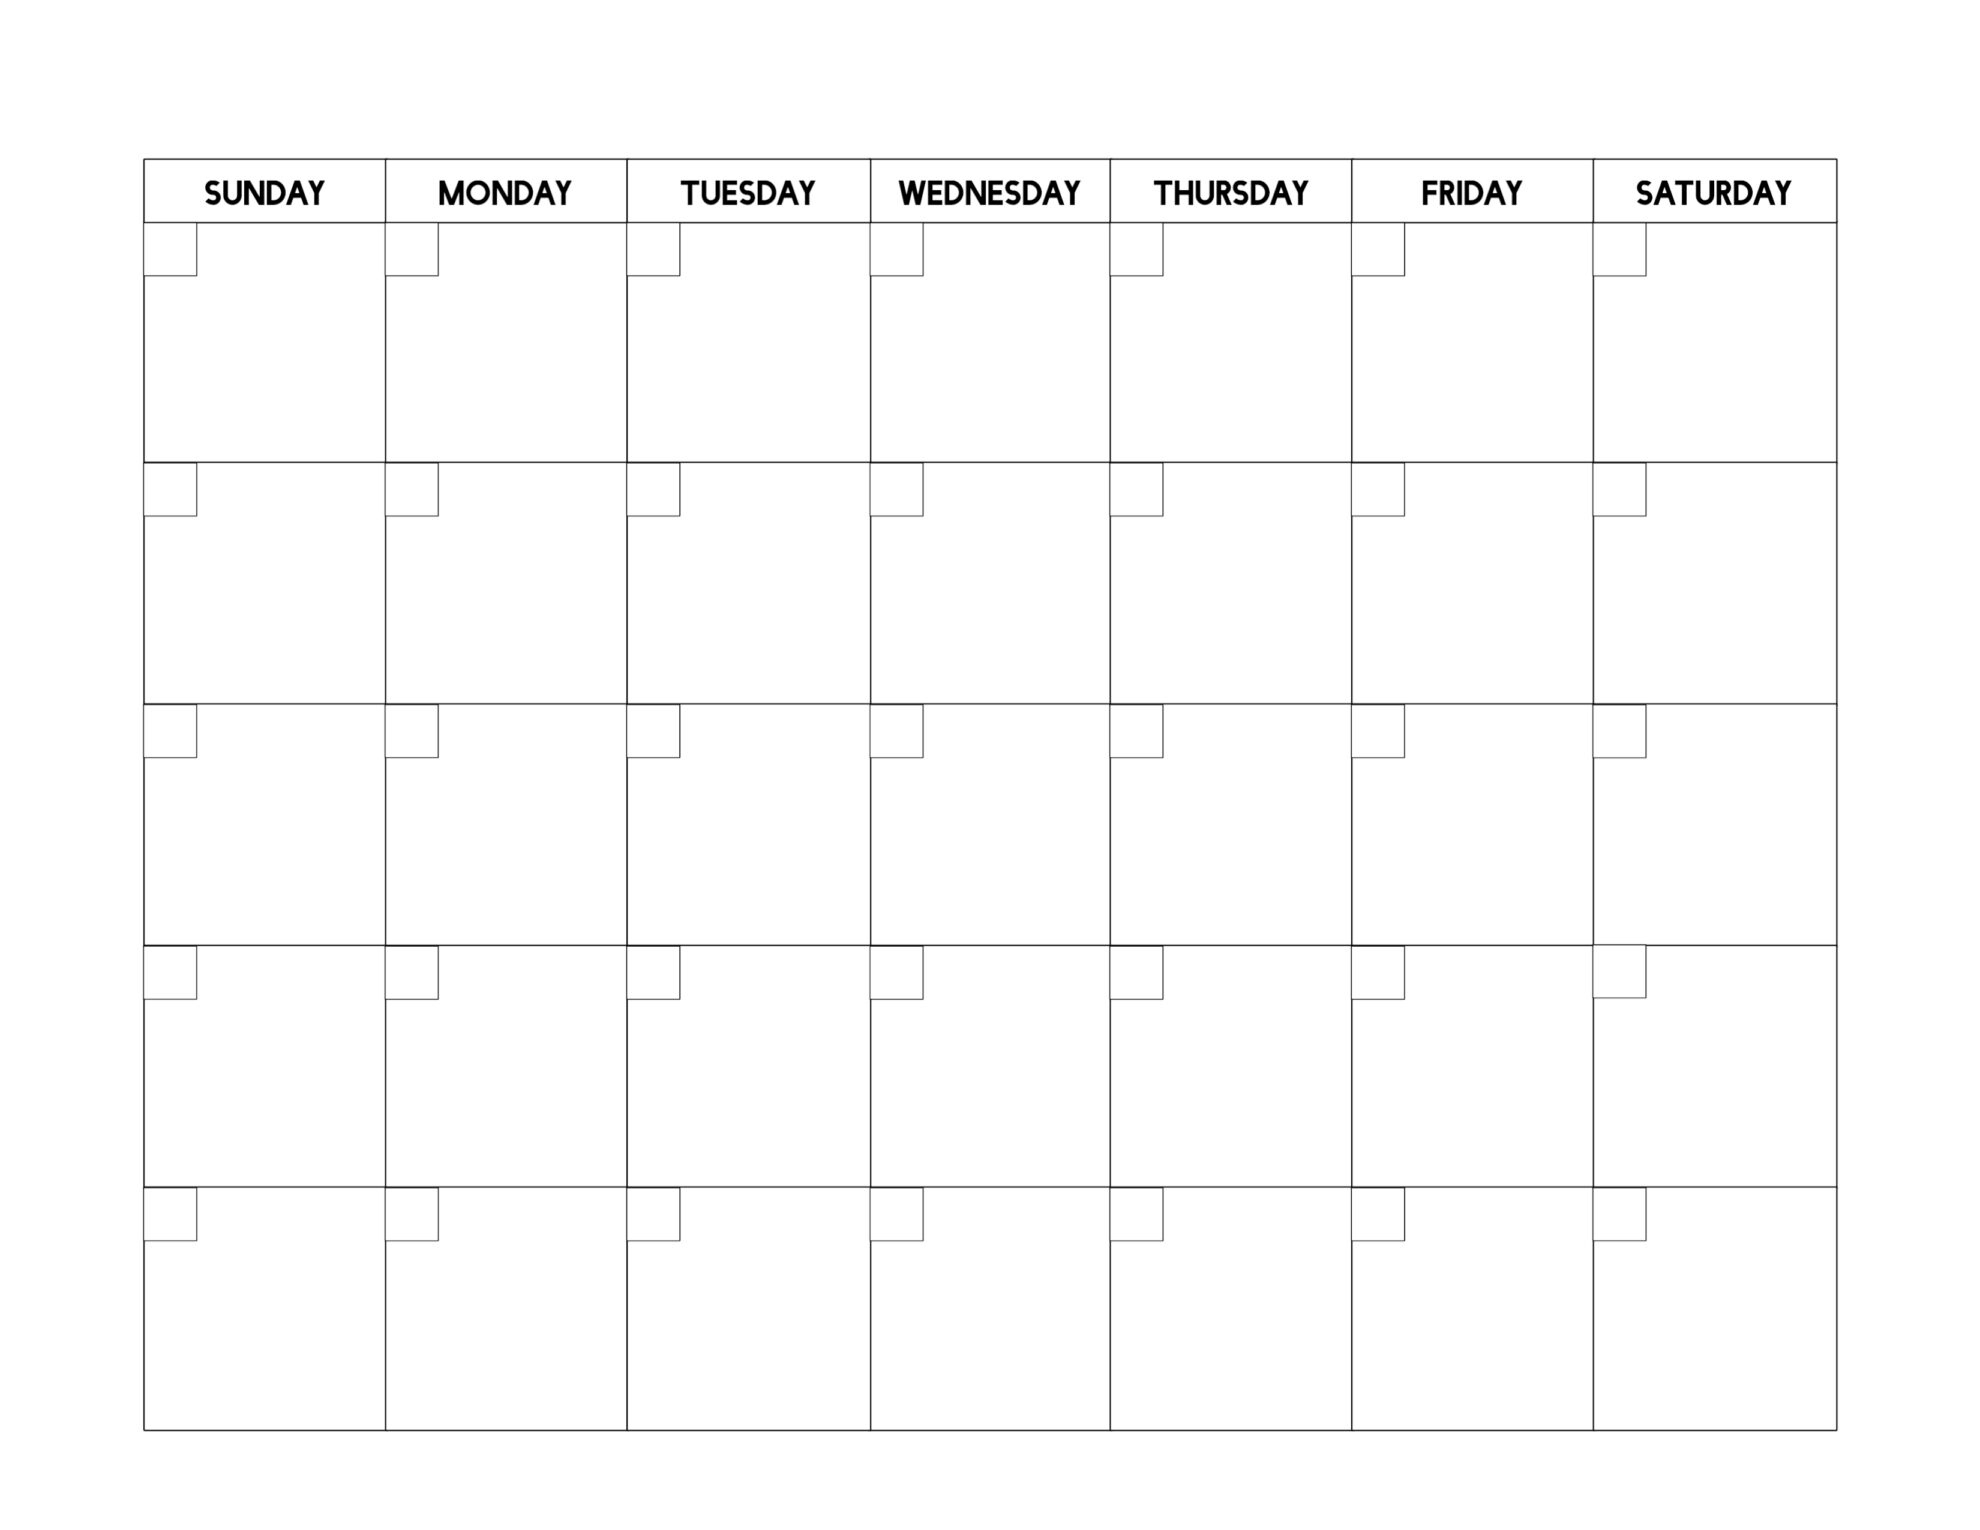 Free Printable Blank Calendar Template | Paper Trail Design Calendar Template With Pictures